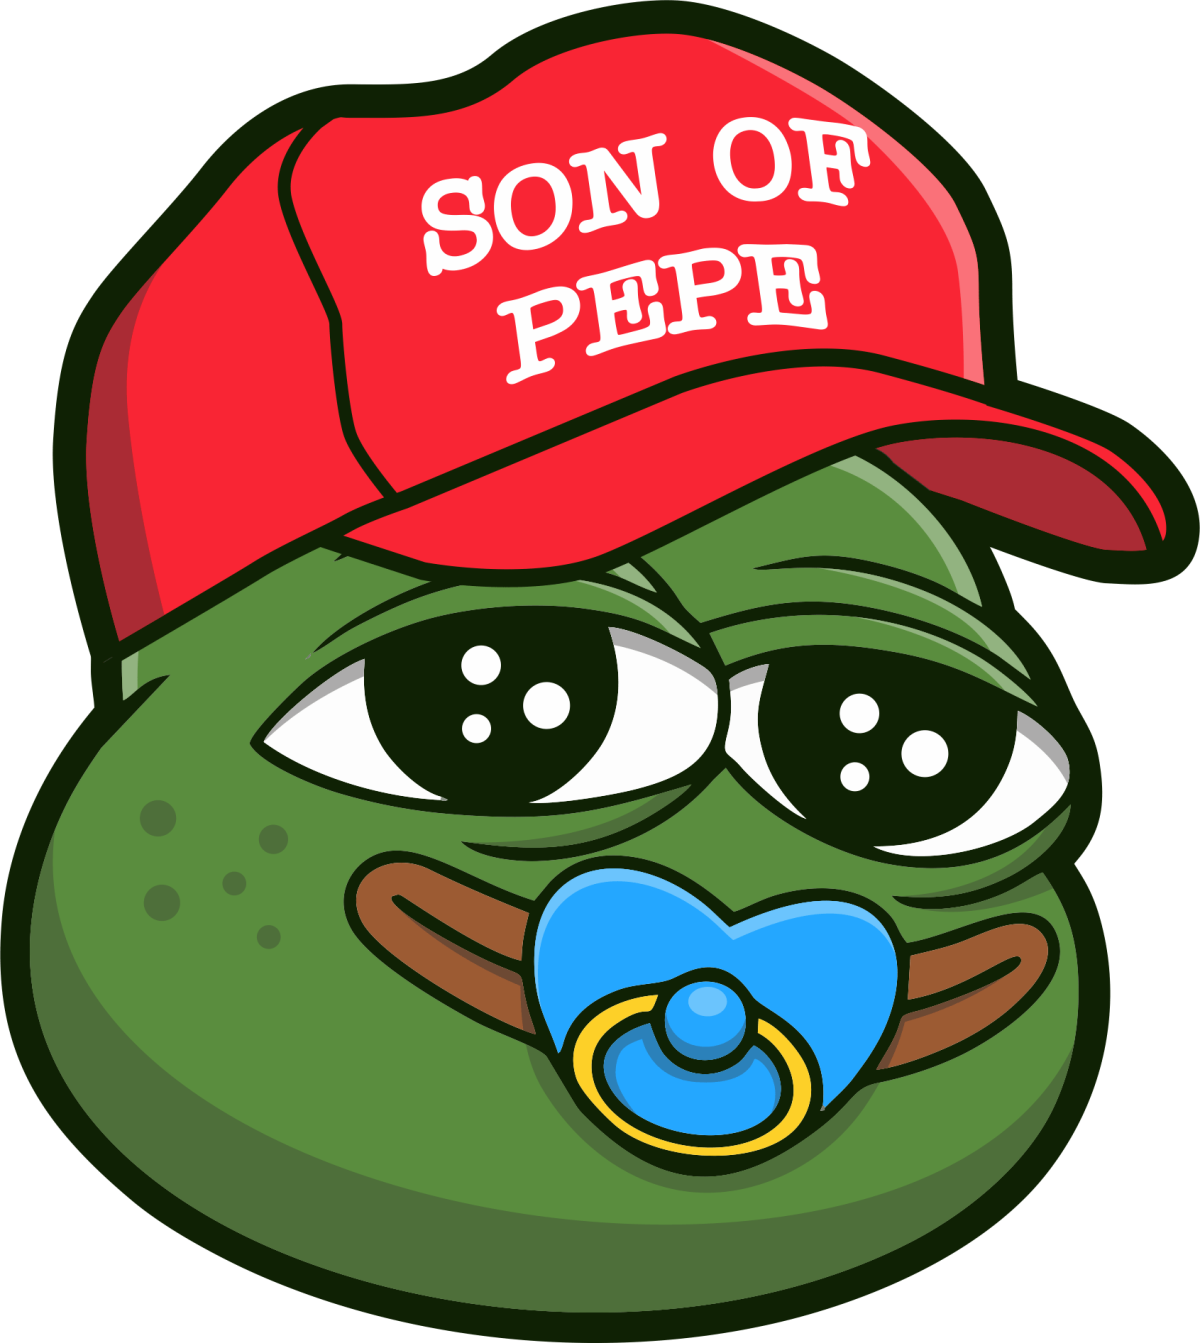 Son of Pepe (SOP) Achieved Phenomenal 1000% Growth Within 24 Hours of ...